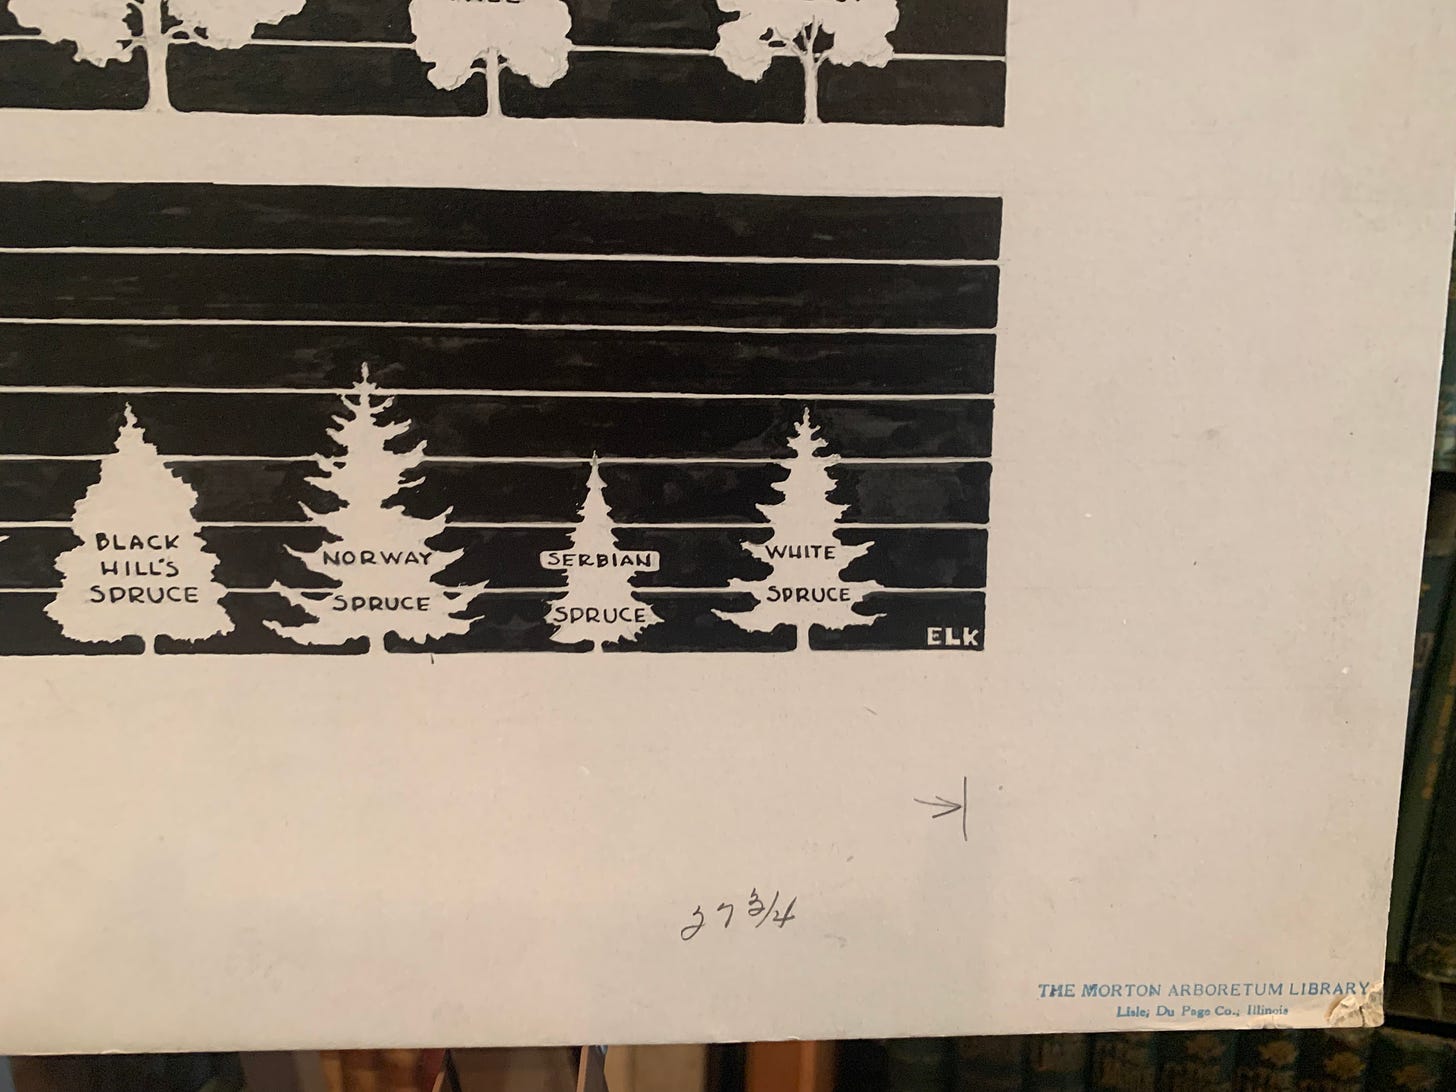 Close up of the poster board, showing some detail of the conifer growth and the initials ELK.